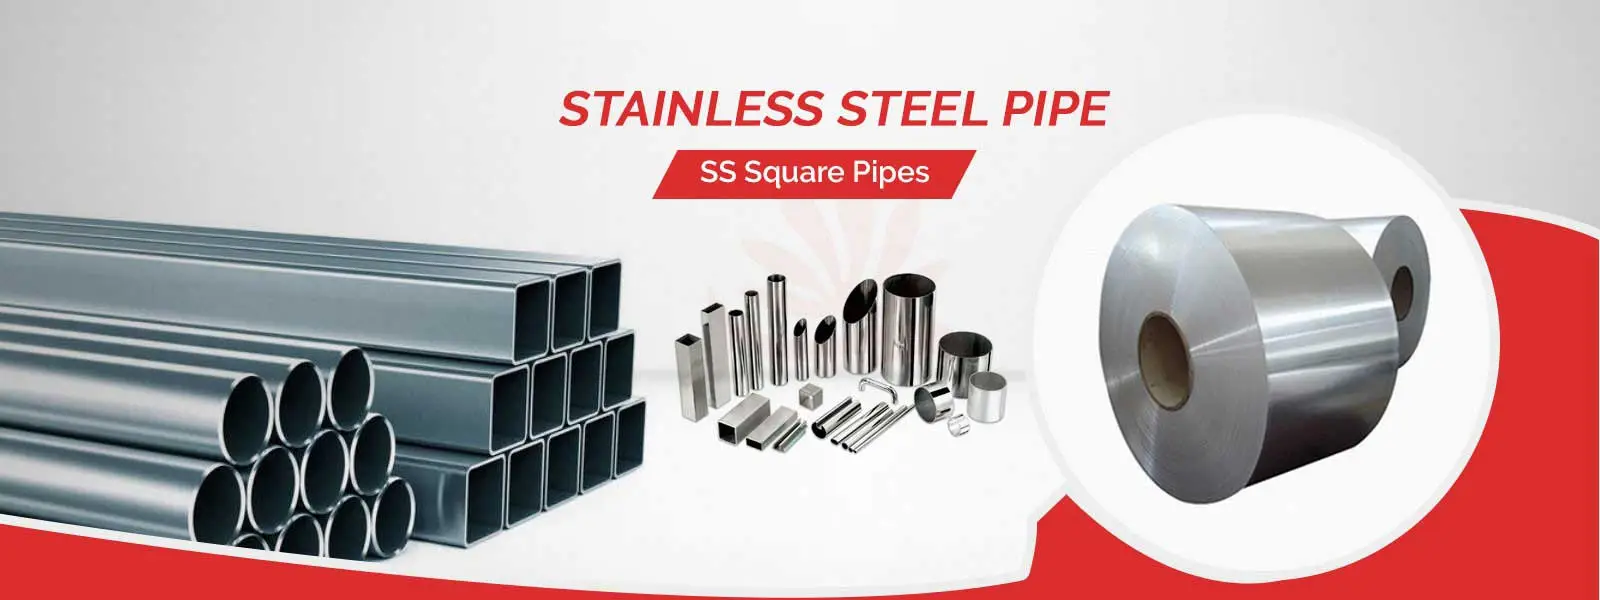 Stainless Steel Pipe Manufacturers in Nashik